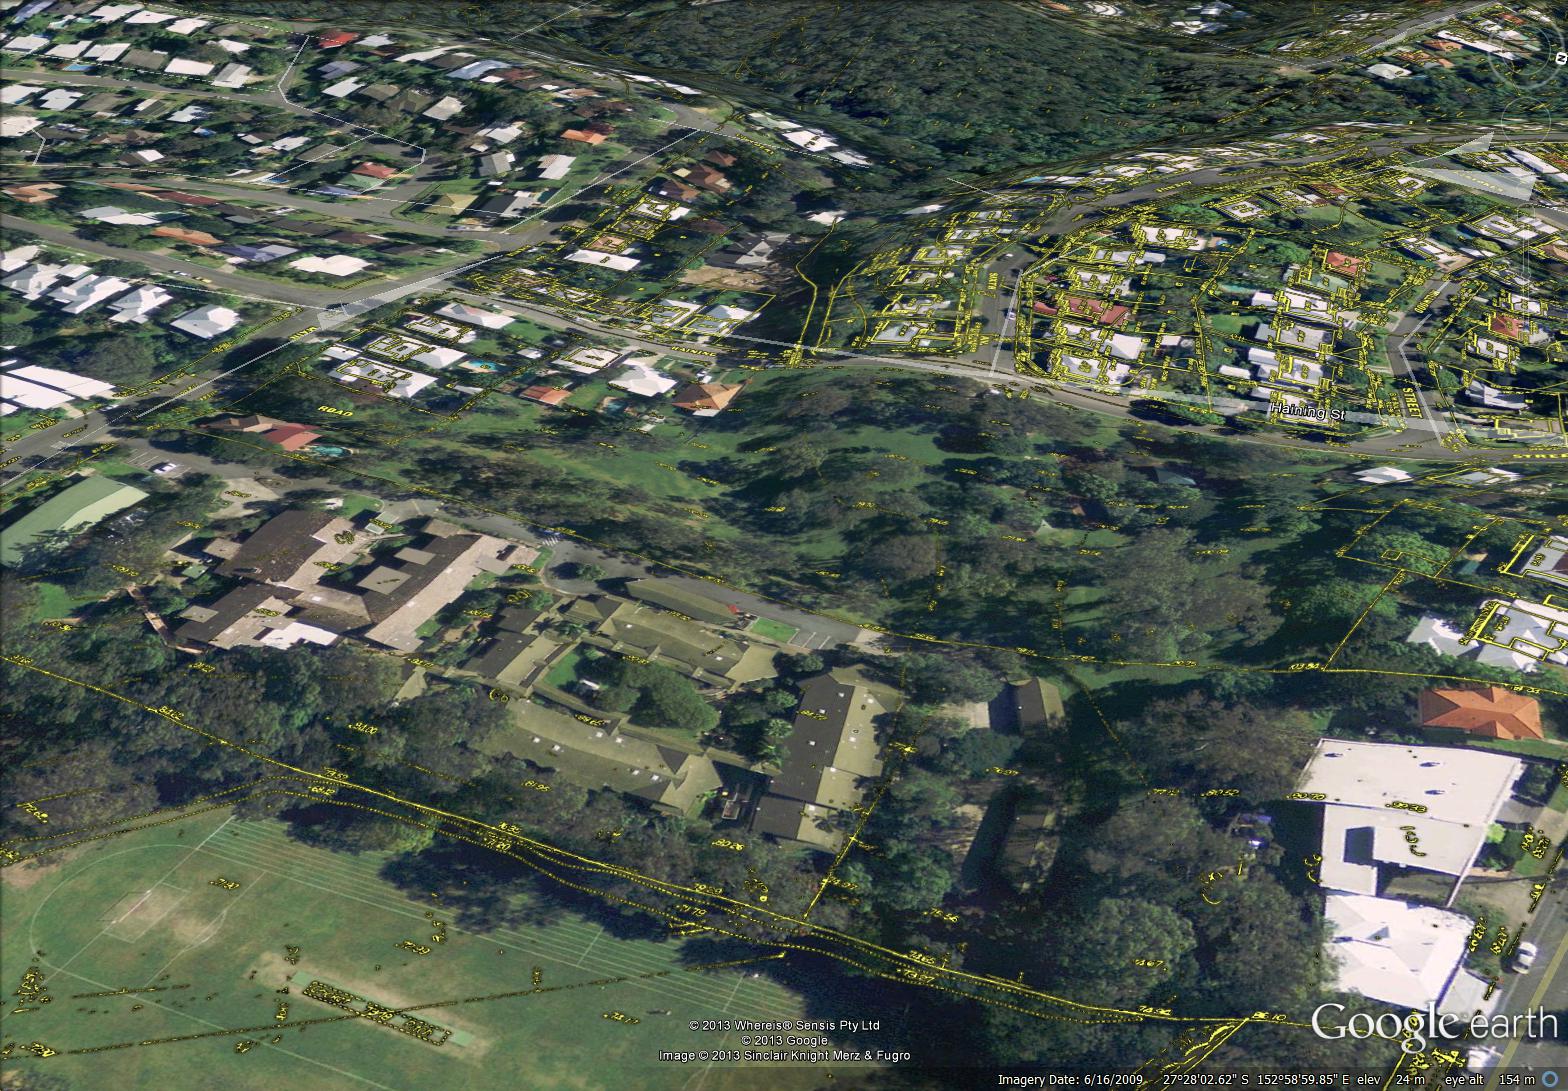 The path of Western Creek from Couldrey Street to Rainworth State School, showing features from the City Council's 'Detail Plans' from the 1940s.